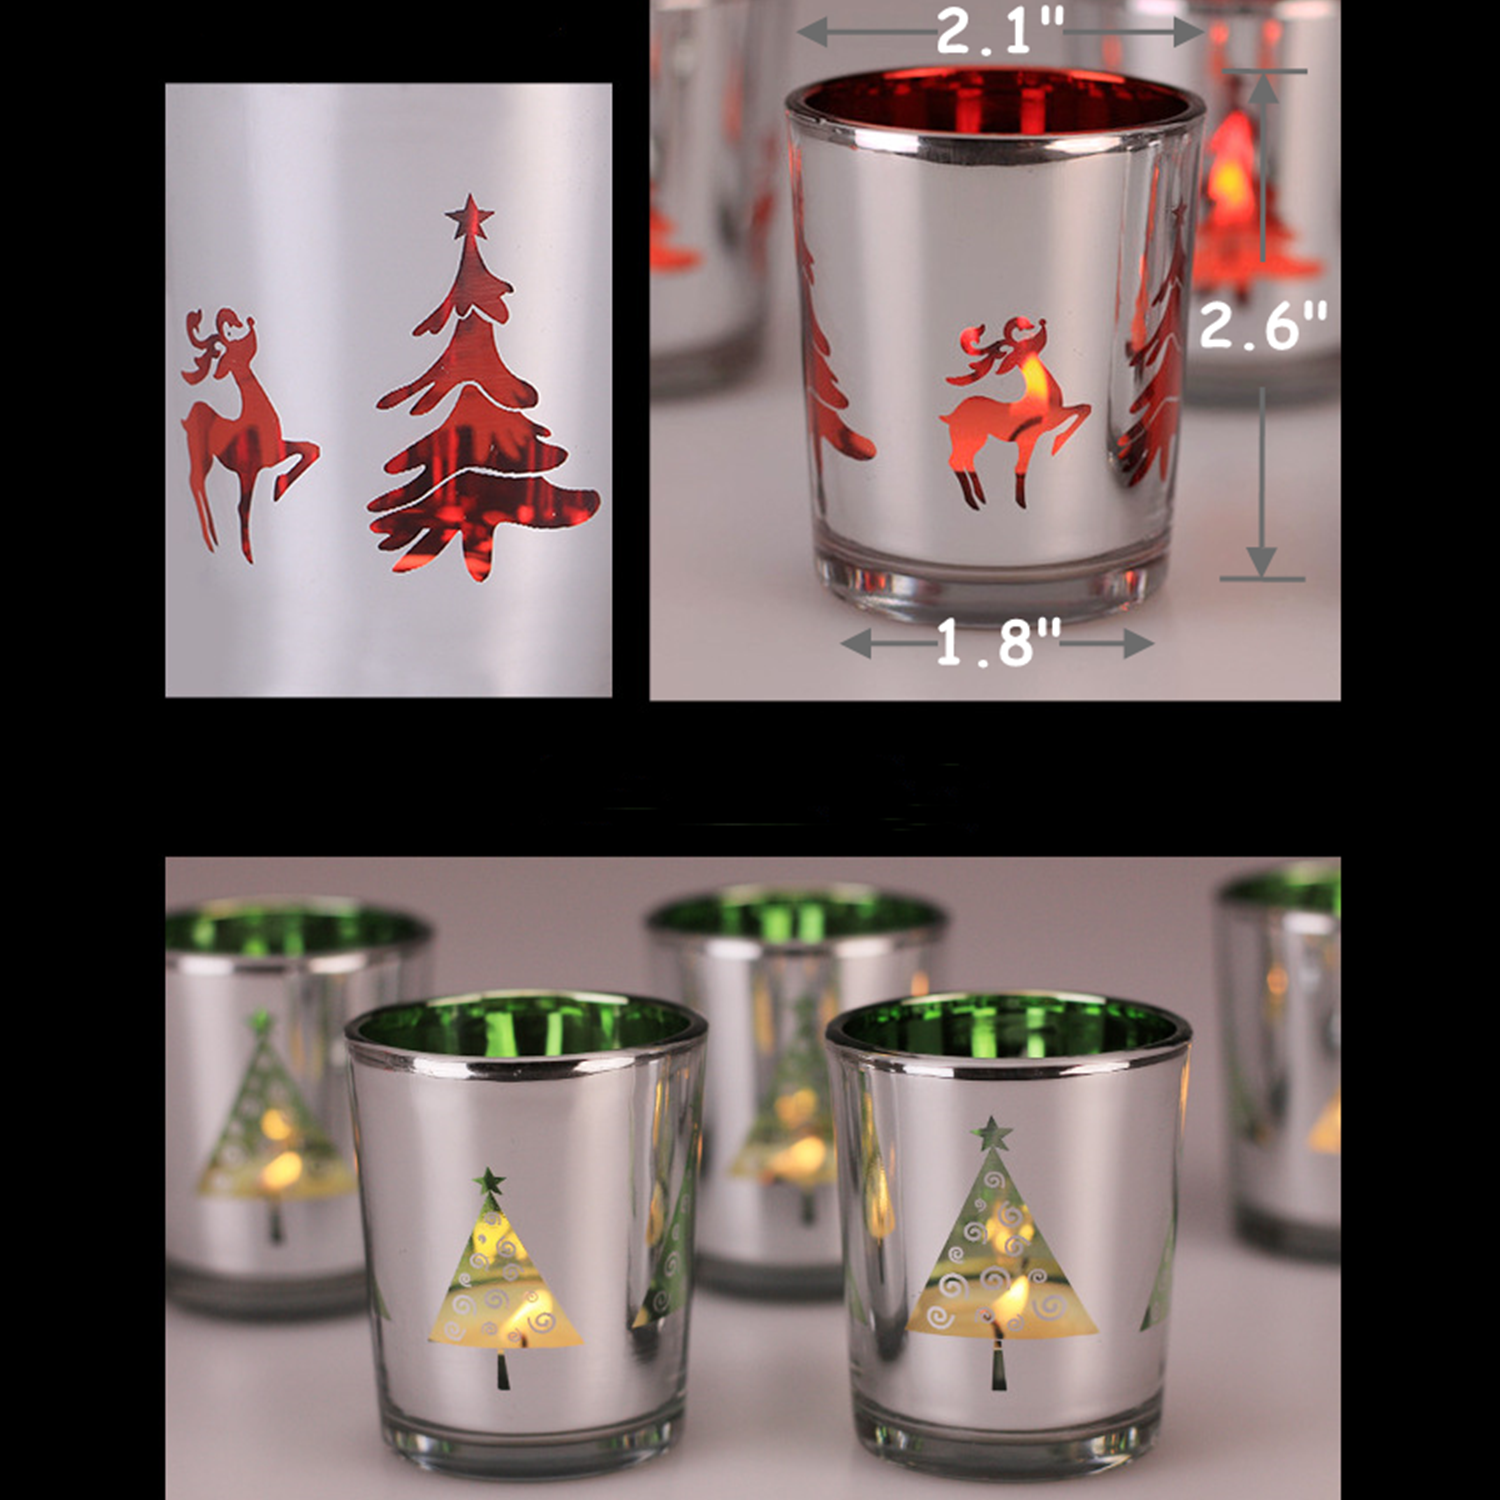 Bulk Christmas Votive Candle Holders for Table Centerpiece, Home Decor, Special Occasions and Gifts Wholesale